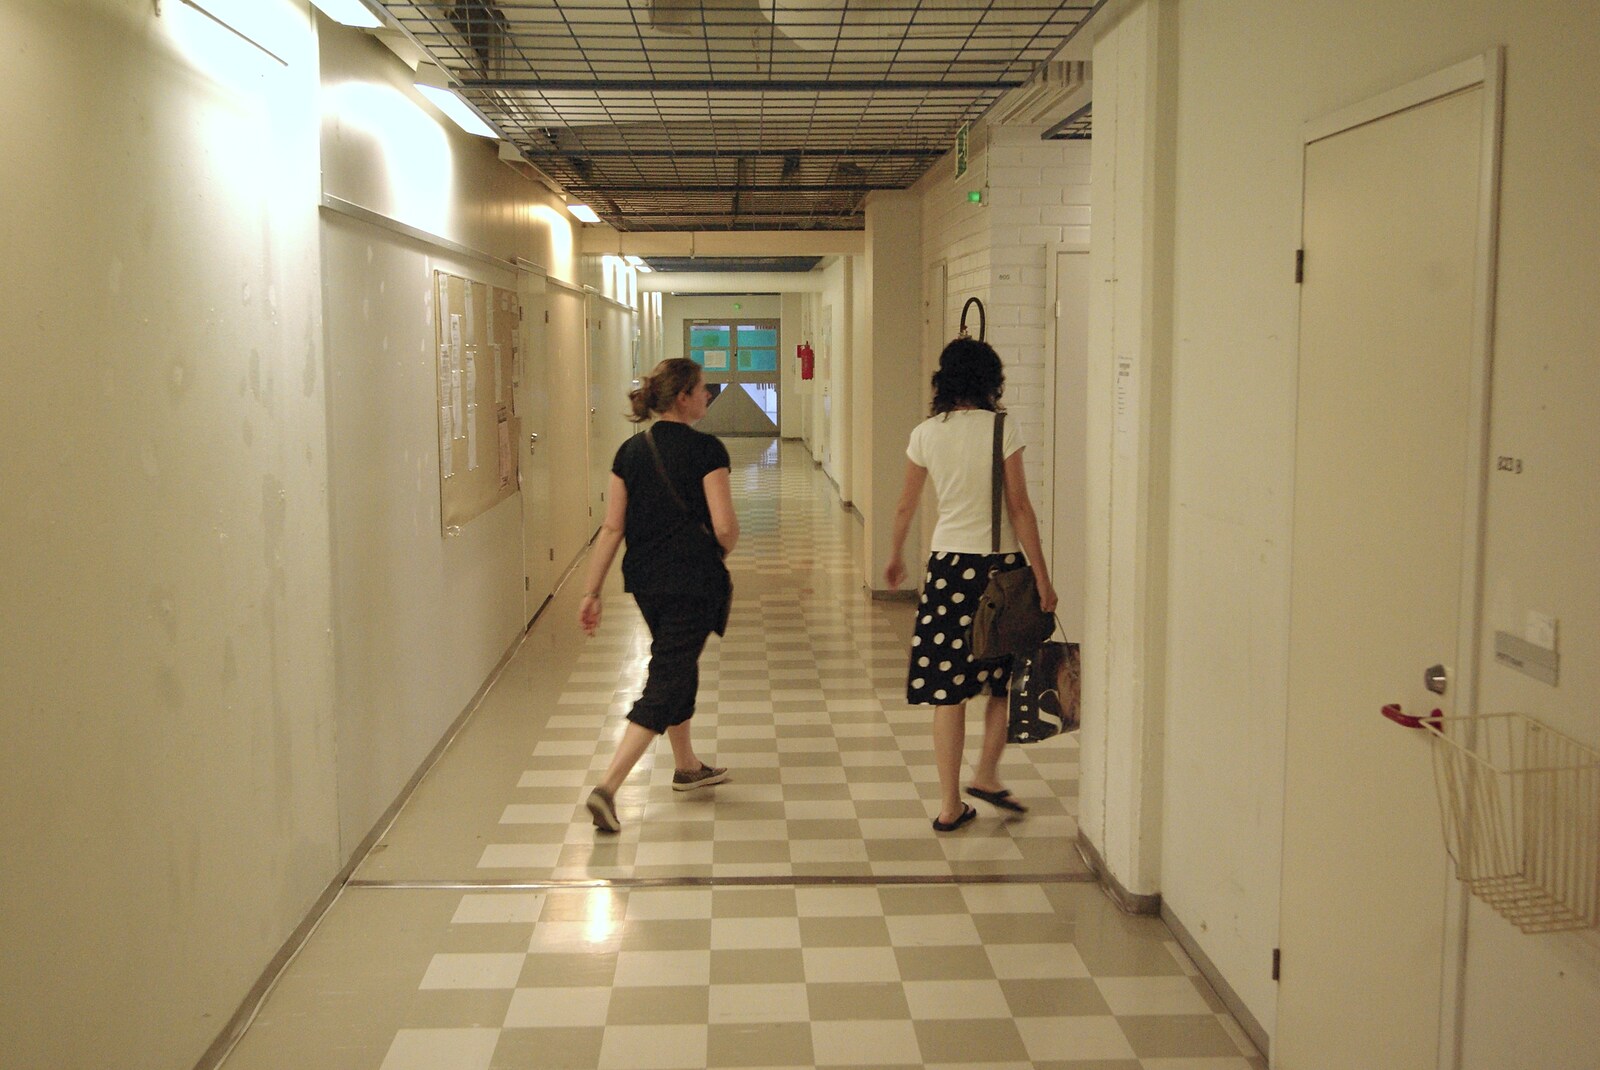 Genesis in Concert, and Suomenlinna, Helsinki, Finland - 11th June 2007: In the corridors of the College of Design